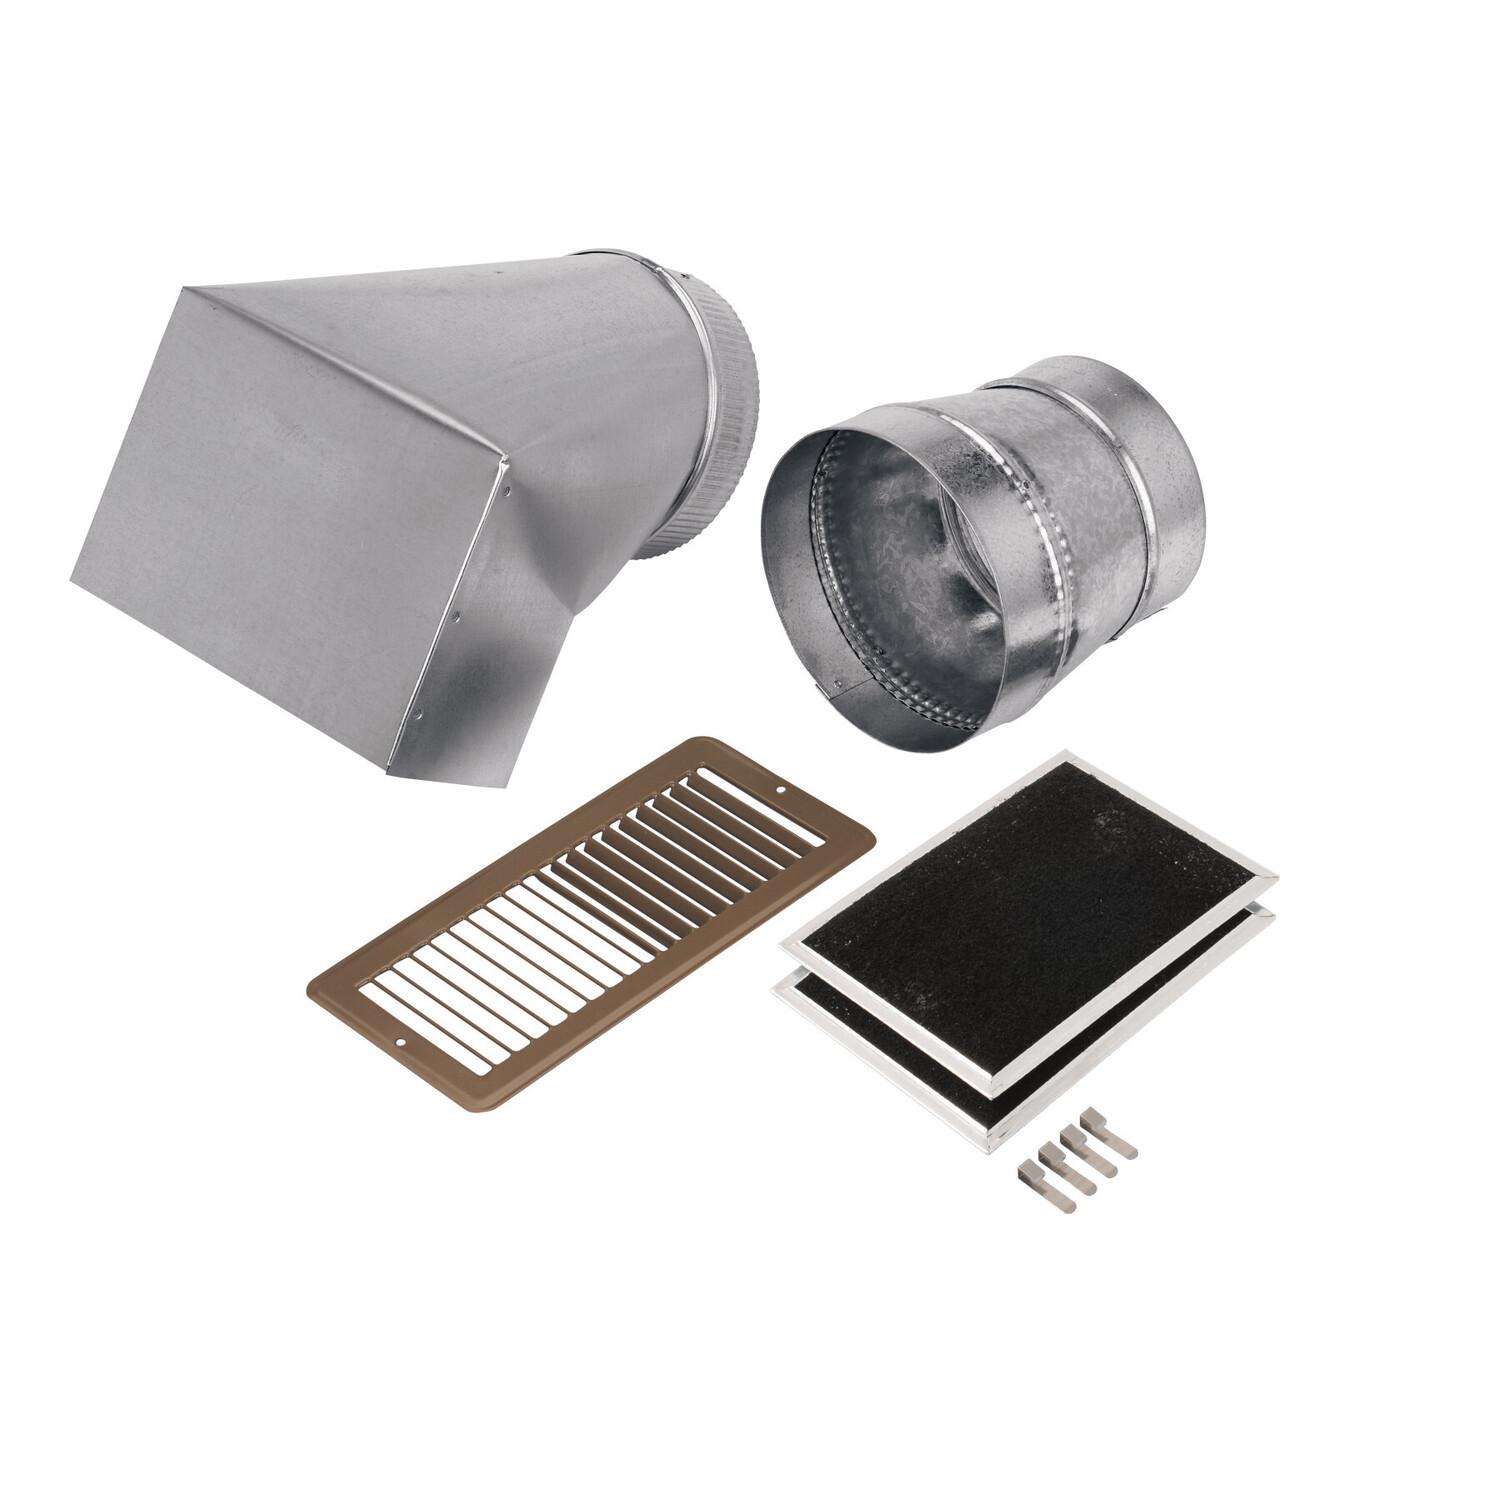 Broan Optional Non-Duct Kit for Broan(R) BBN Powerpack Insert Series